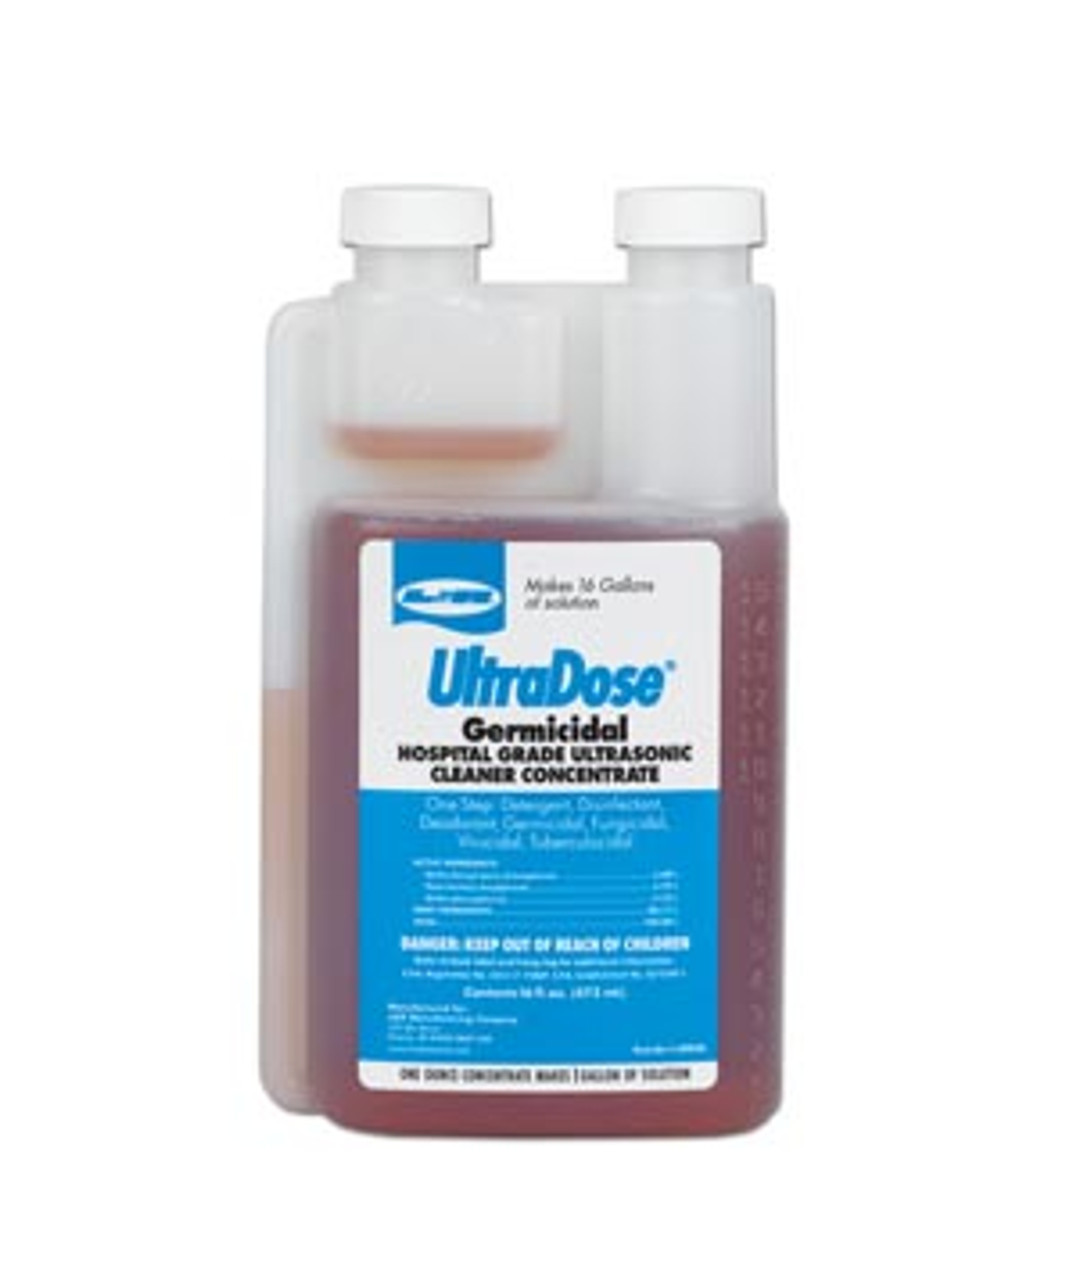 UD036 L&R Manufacturing Company Germicidal Ultrasonic Cleaning Solution,  Pint Bottle, 6/cs (Not Available in Canada)